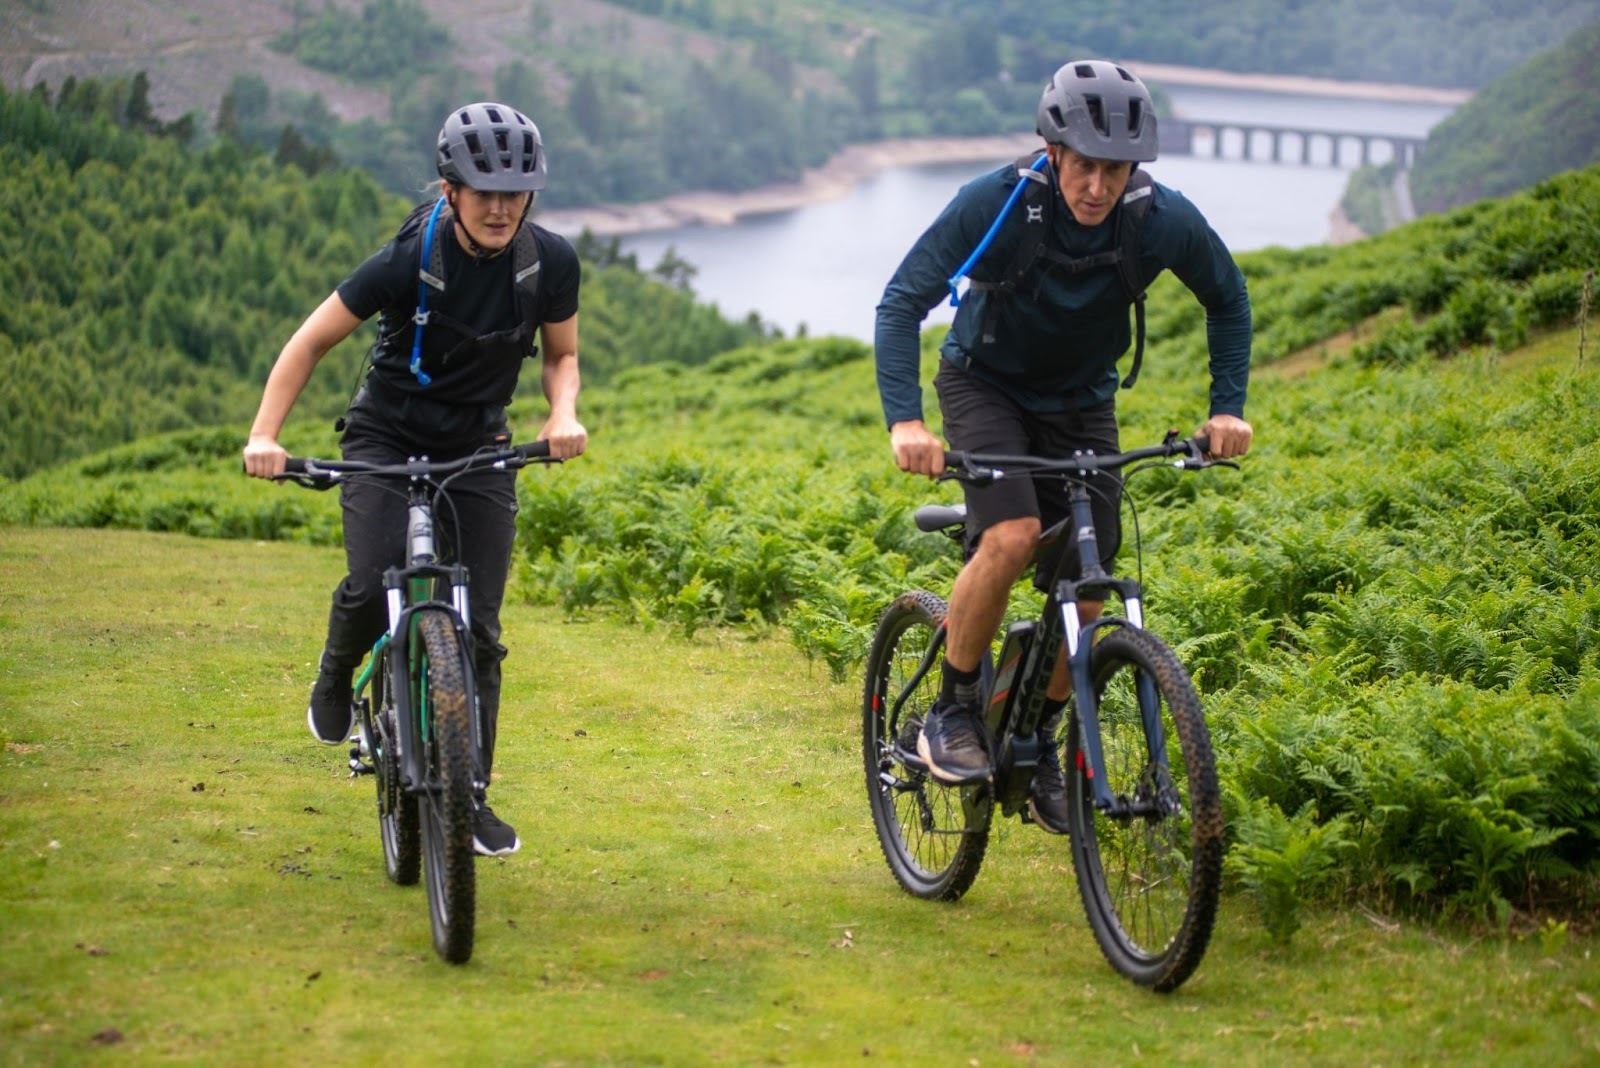 Halfords are offering a selection of 12 e-bikes to customers.